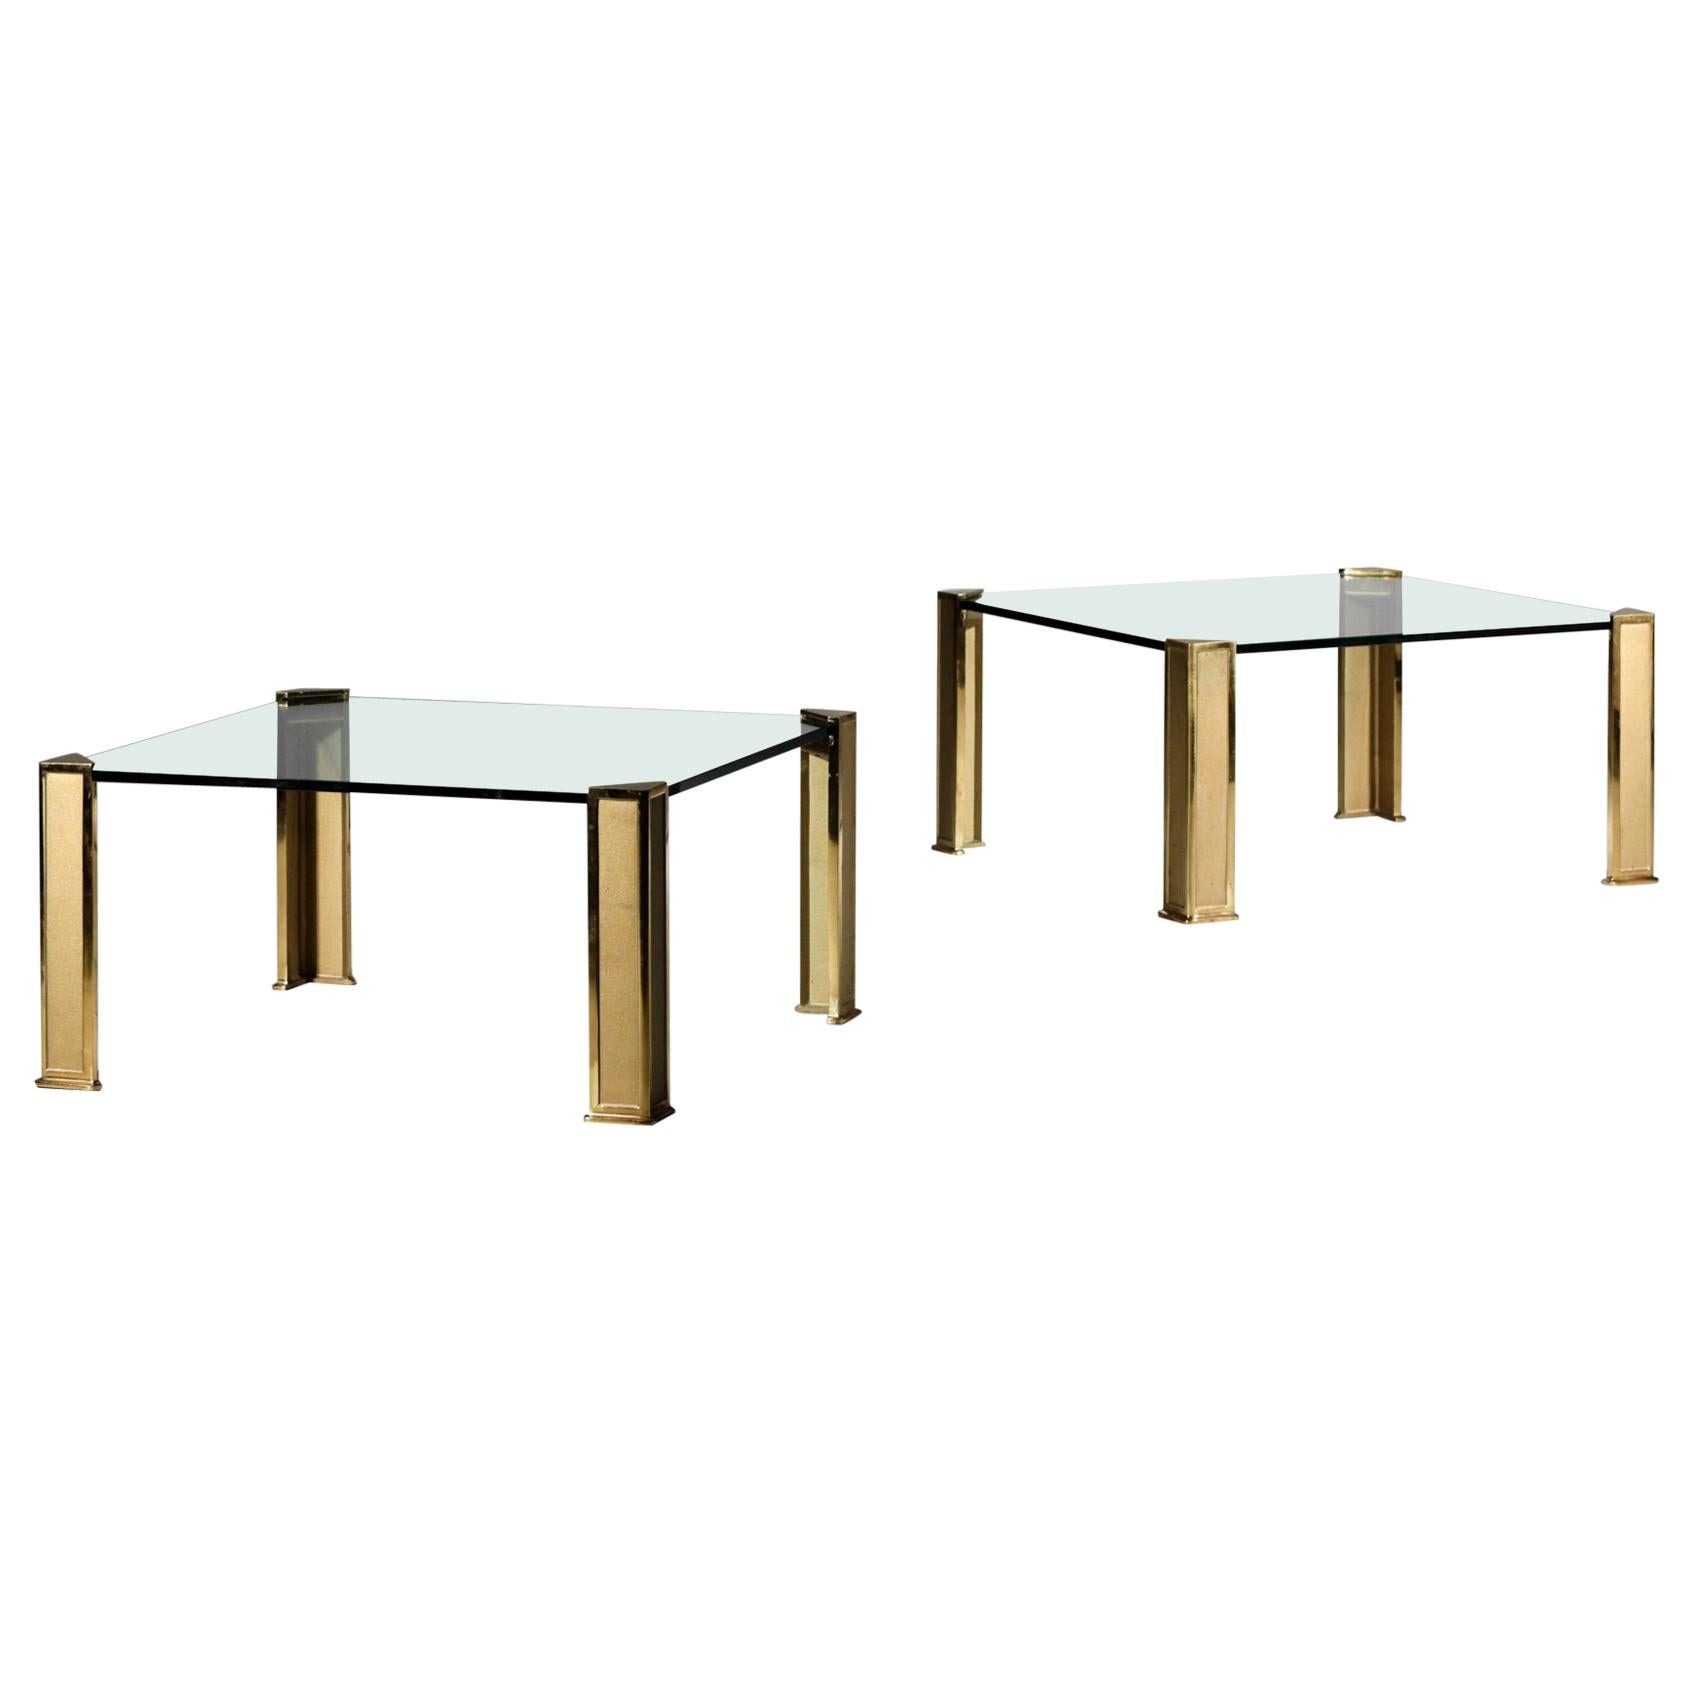 Pair of Coffee Table by Ppeter Ghyczy Gilded Bronze 1960's Vintage, Holland For Sale